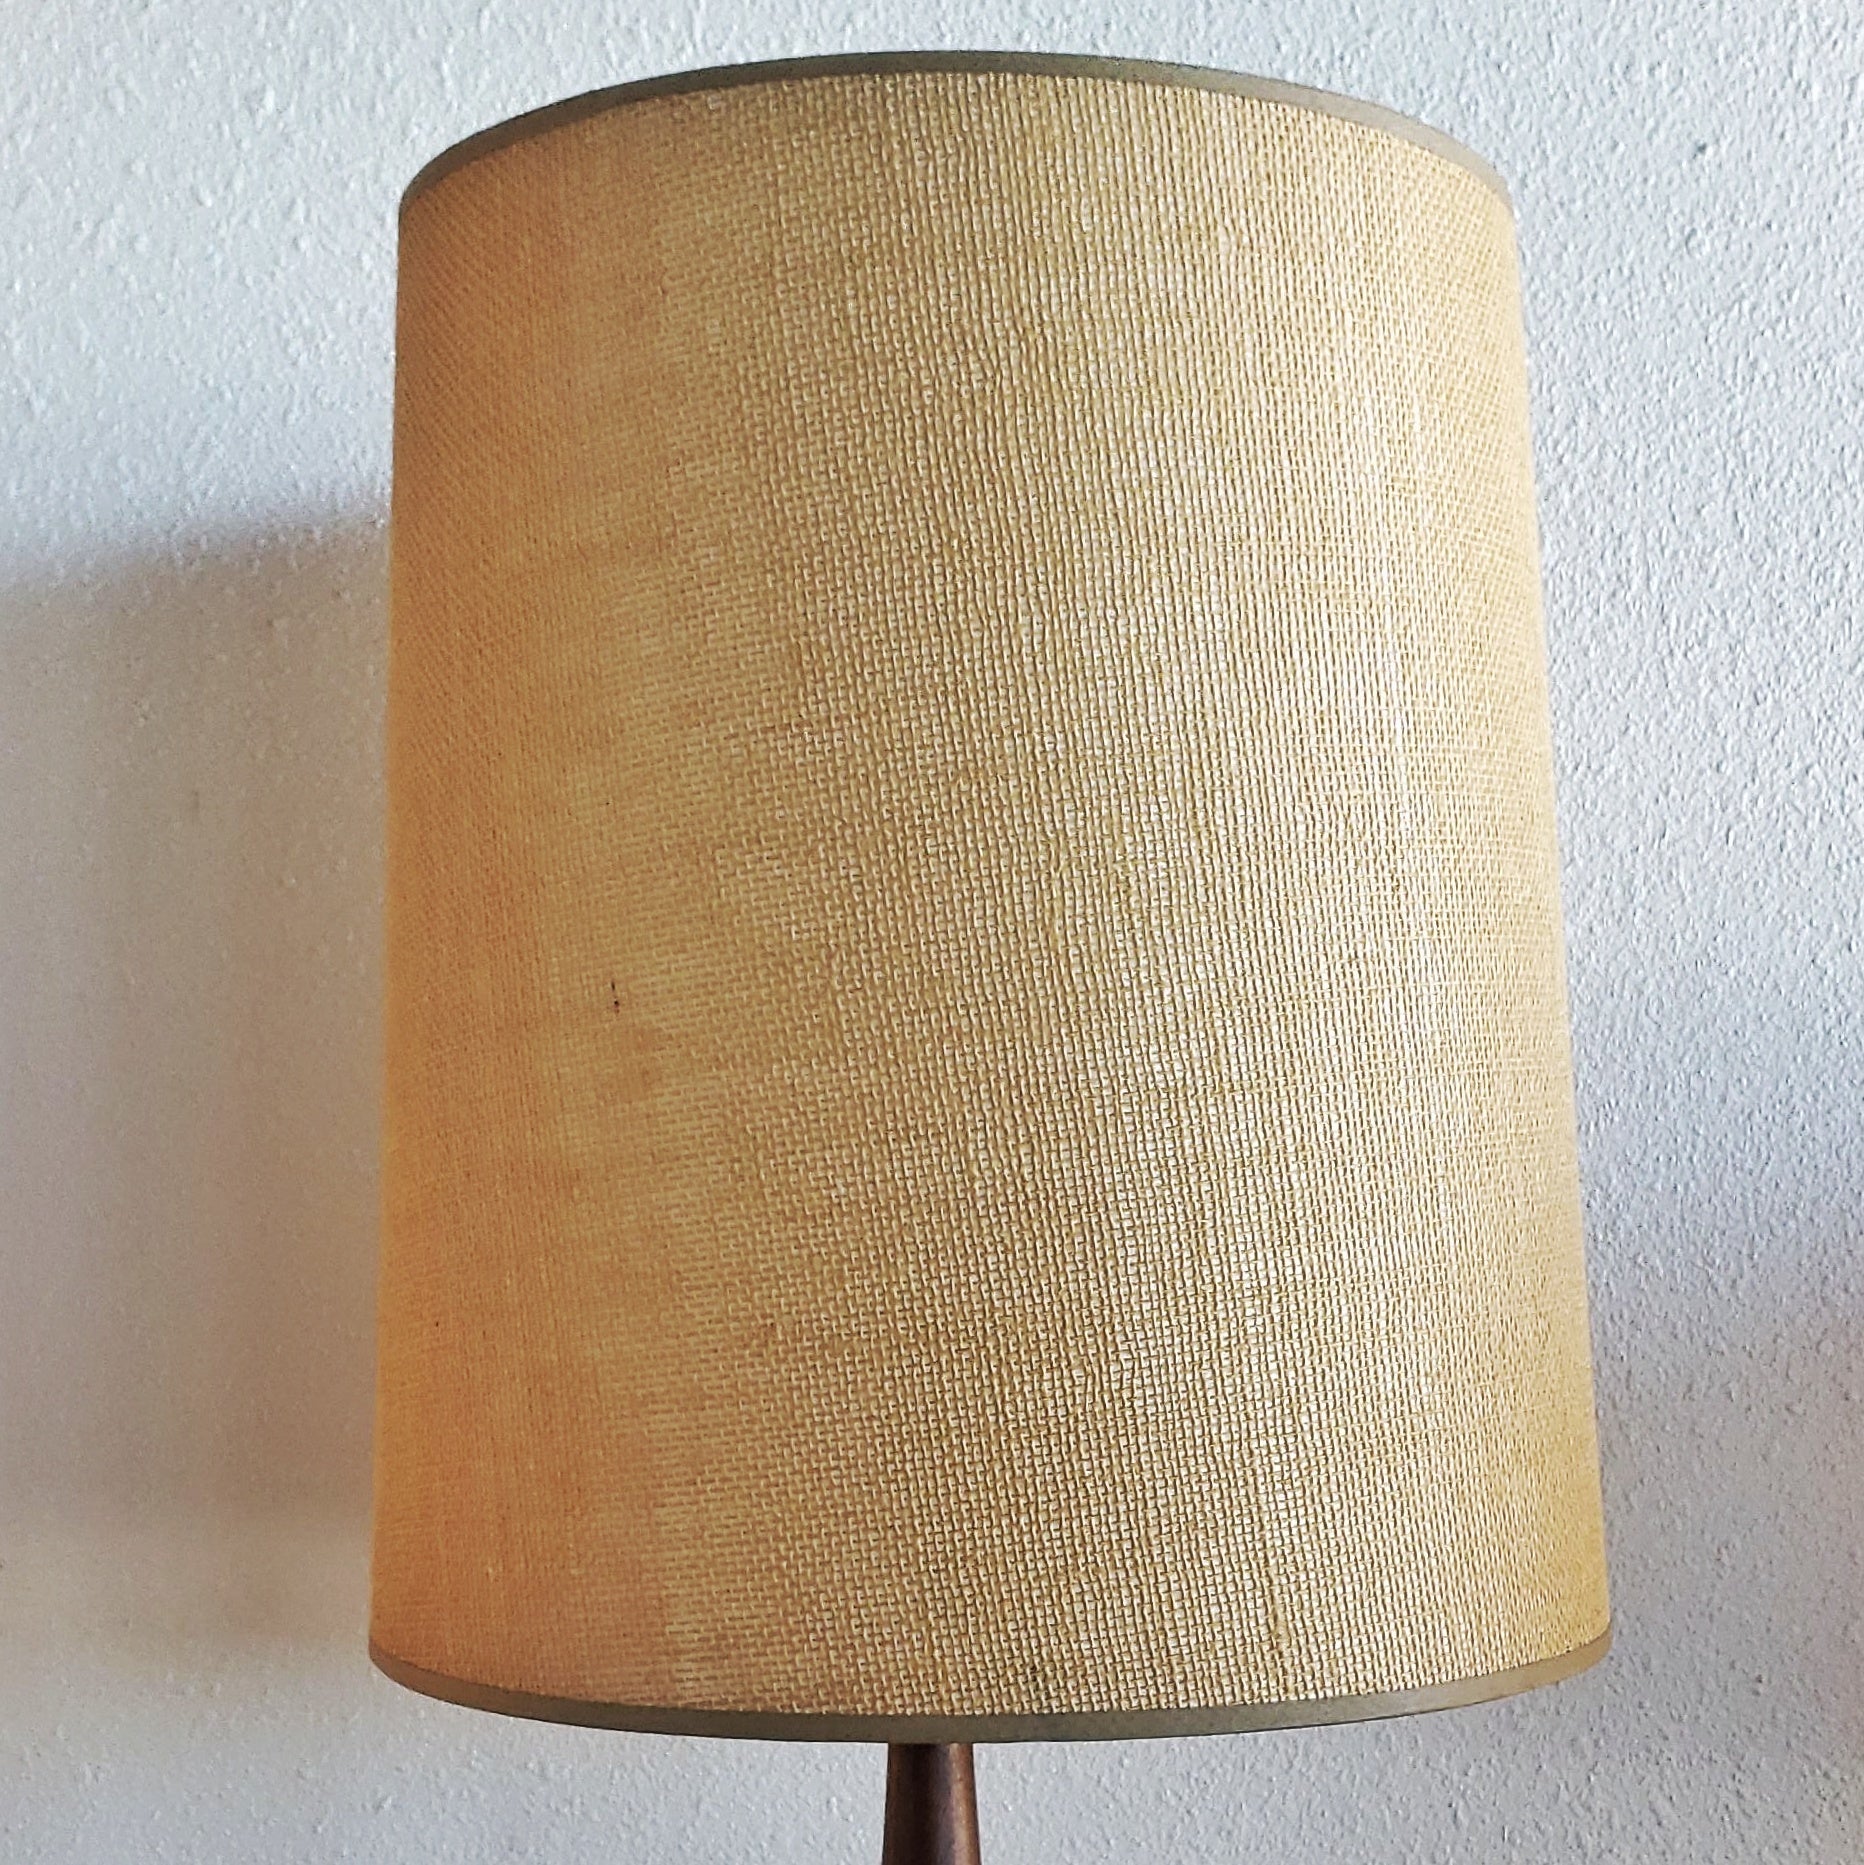 CANADIAN STUDIO POTTERY TABLE LAMP - UNSIGNED